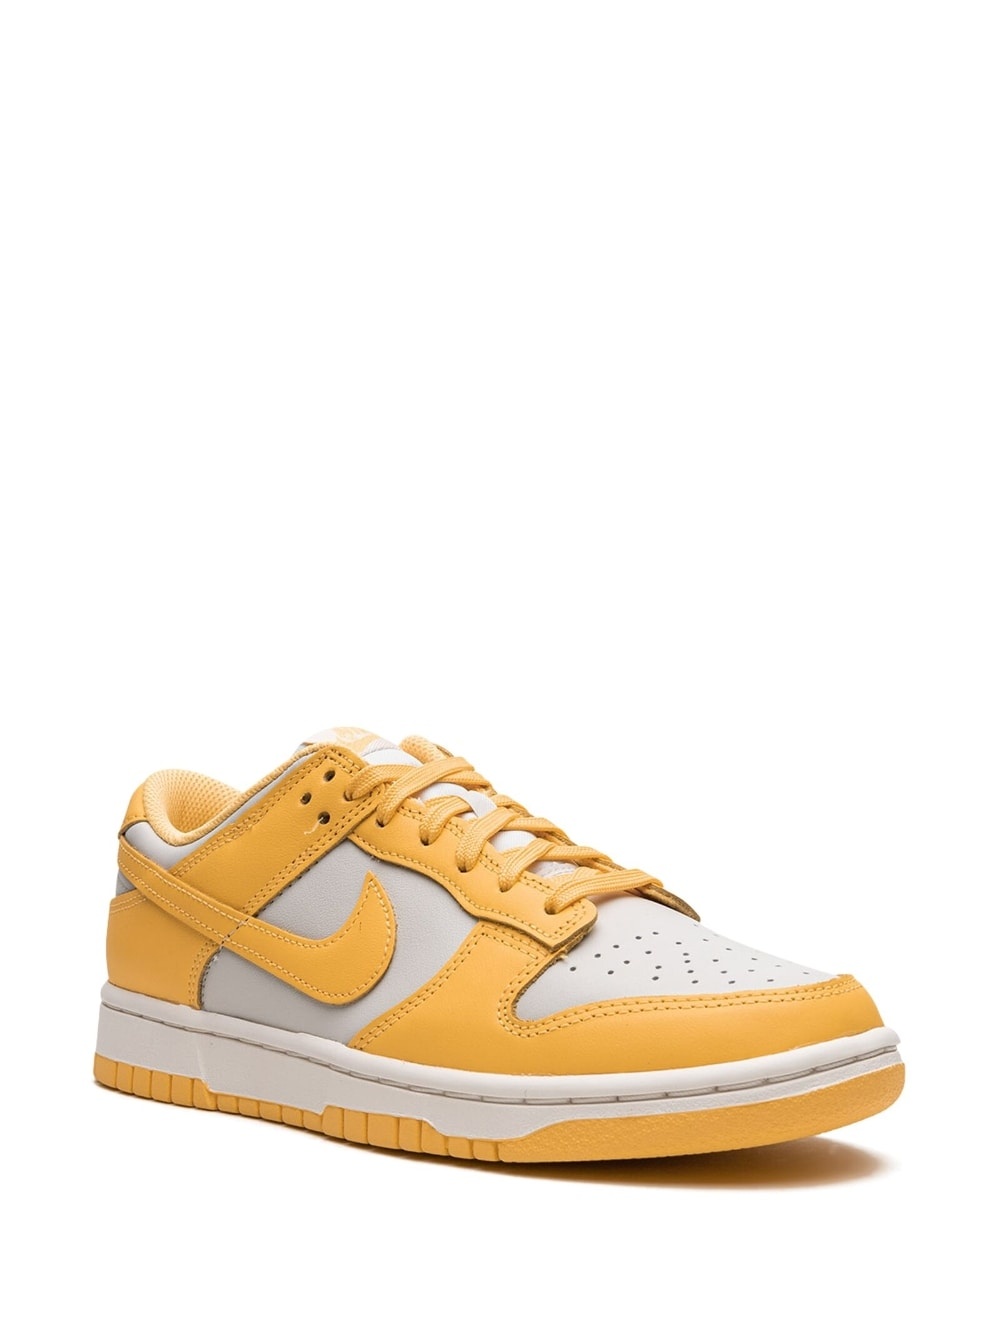 Dunk Low "Citron Pulse" sneakers - 2